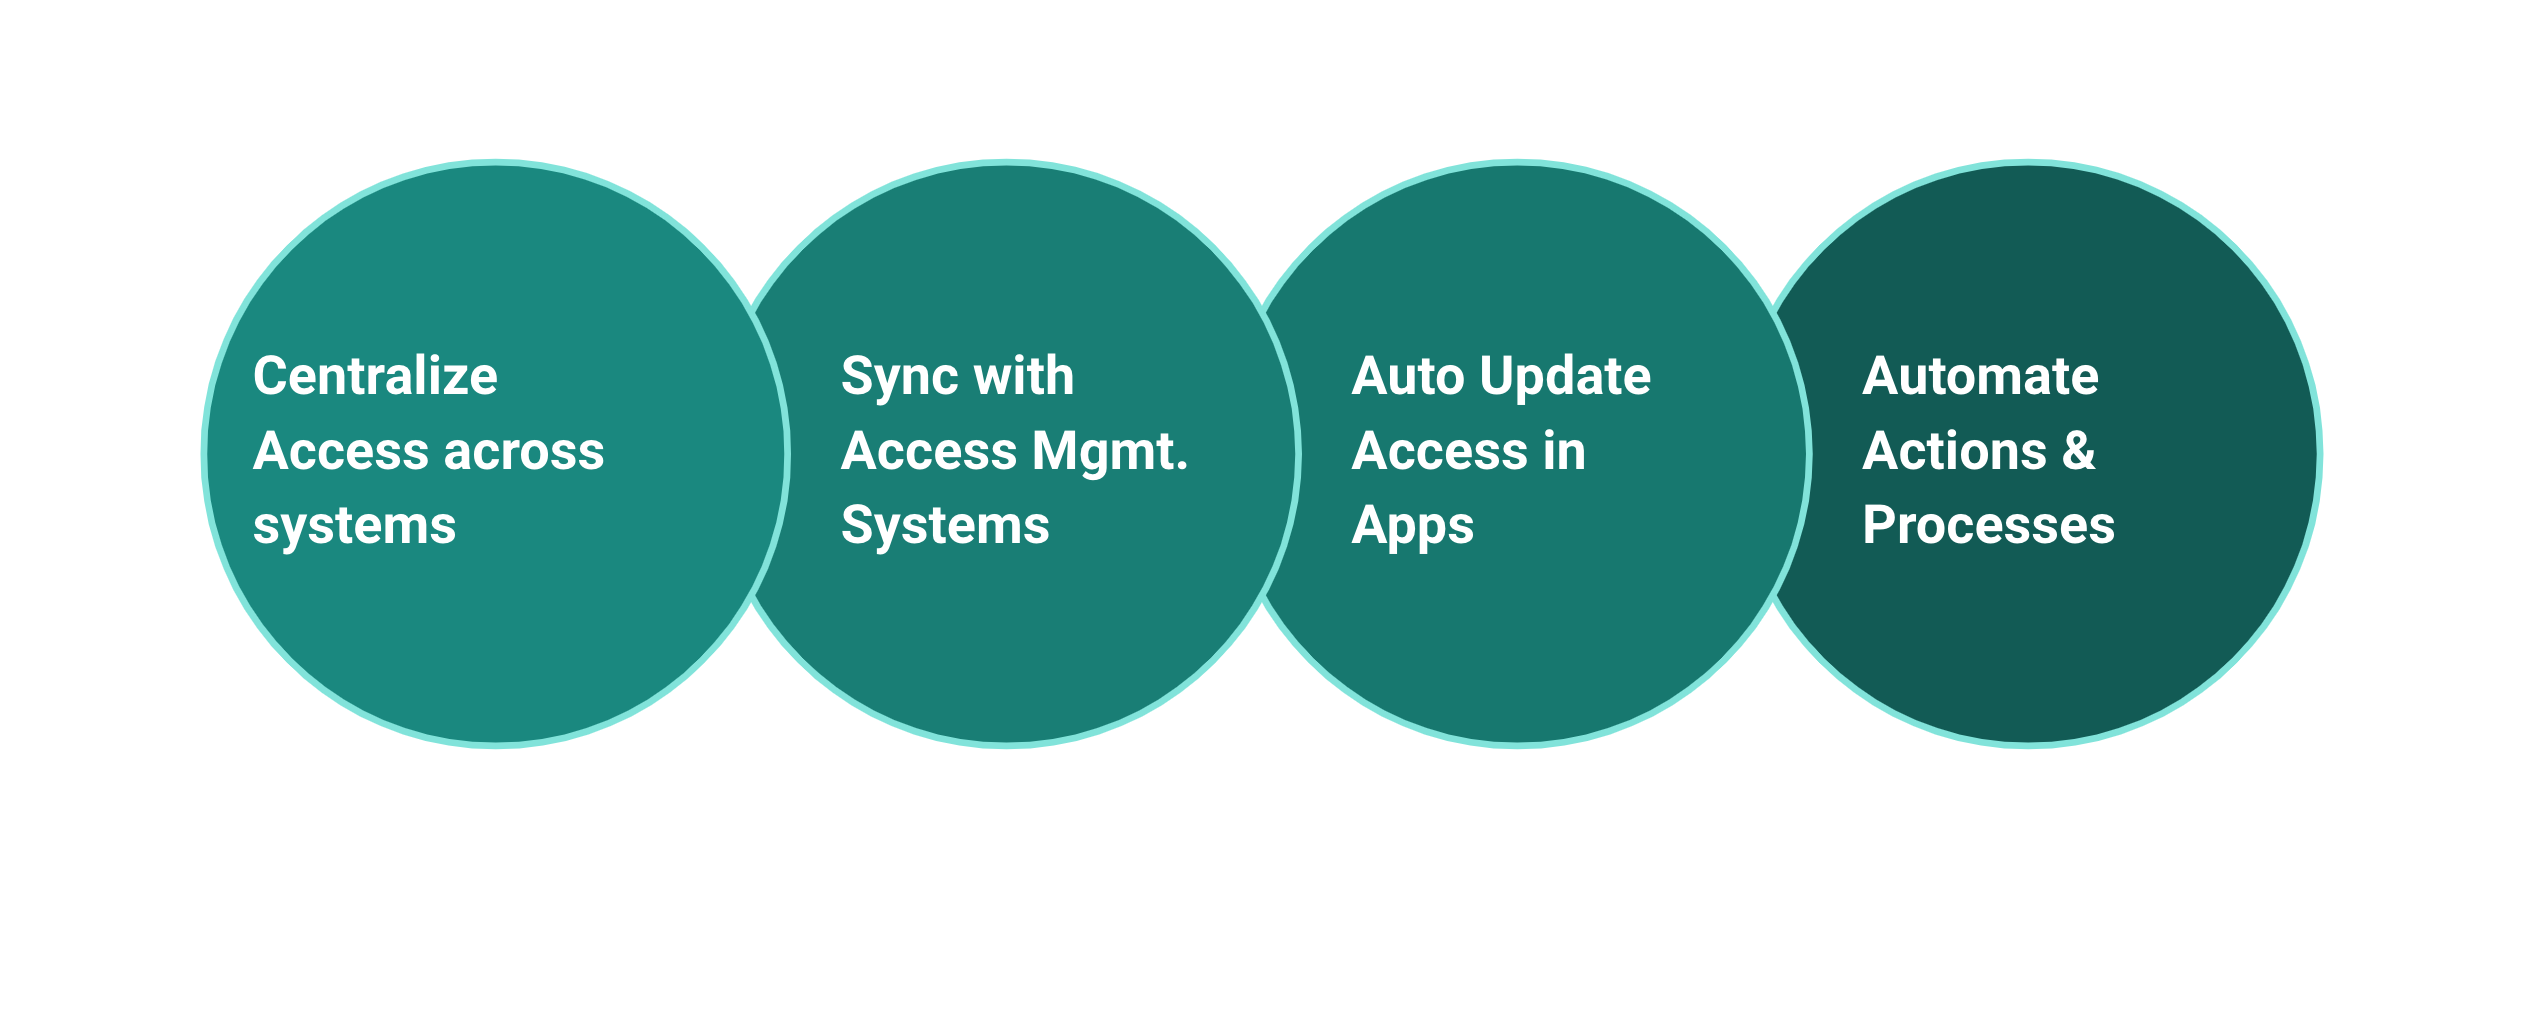 utomatically sync and update user access across multiple apps